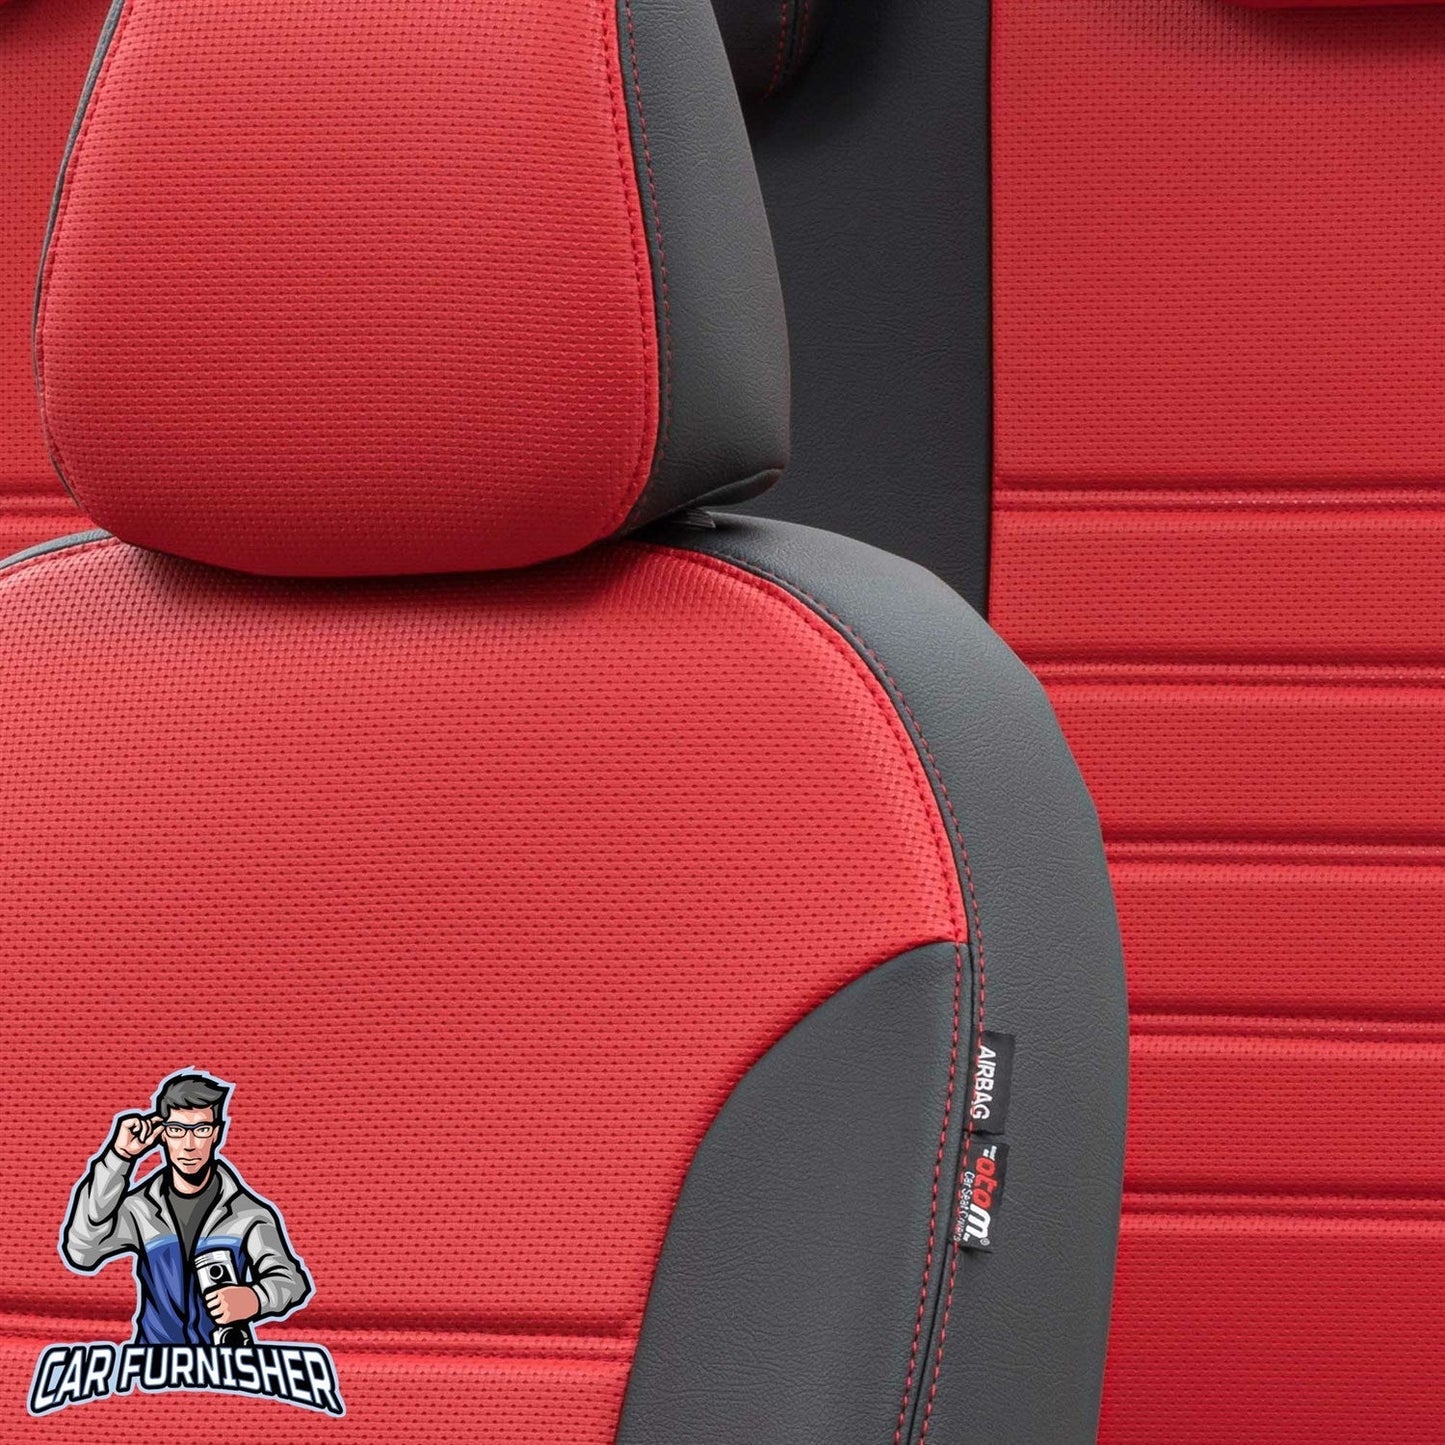 Kia Carens Seat Cover New York Leather Design Red Leather